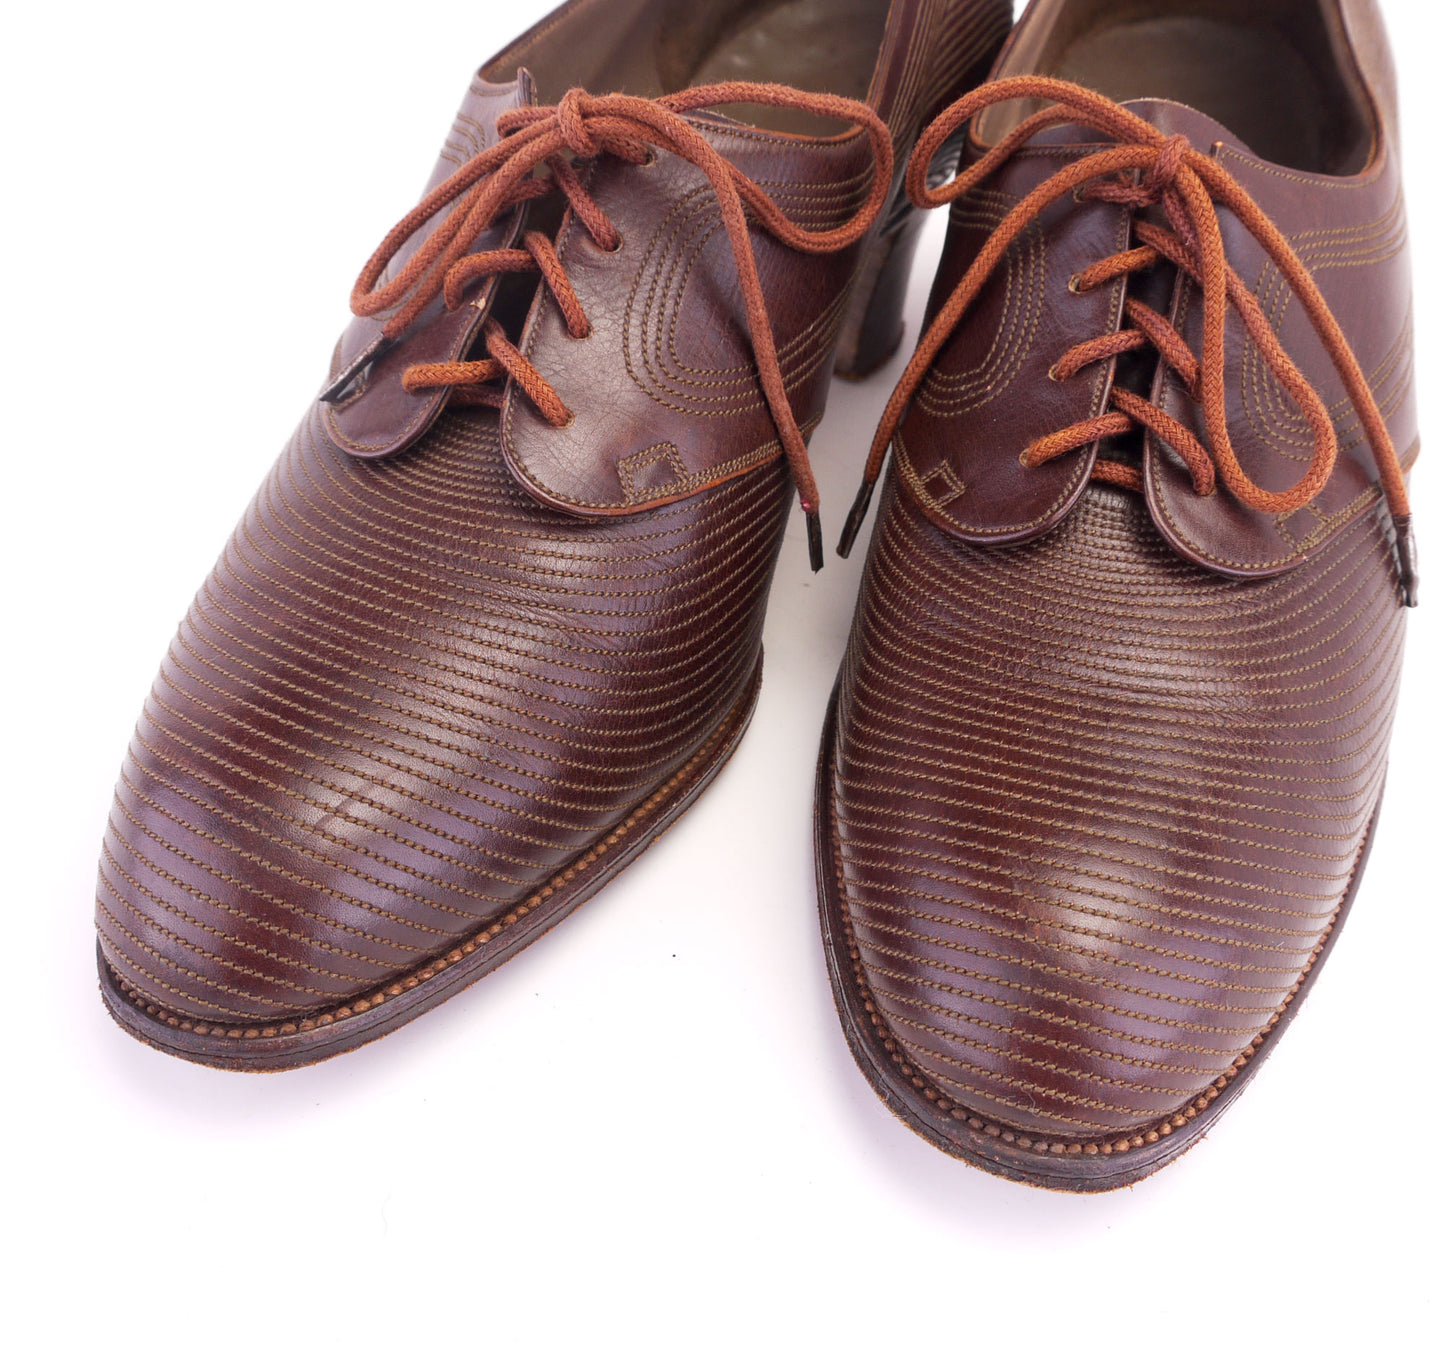 1930s Decorative Stitched Lace Ups by Reeves UK 4.5